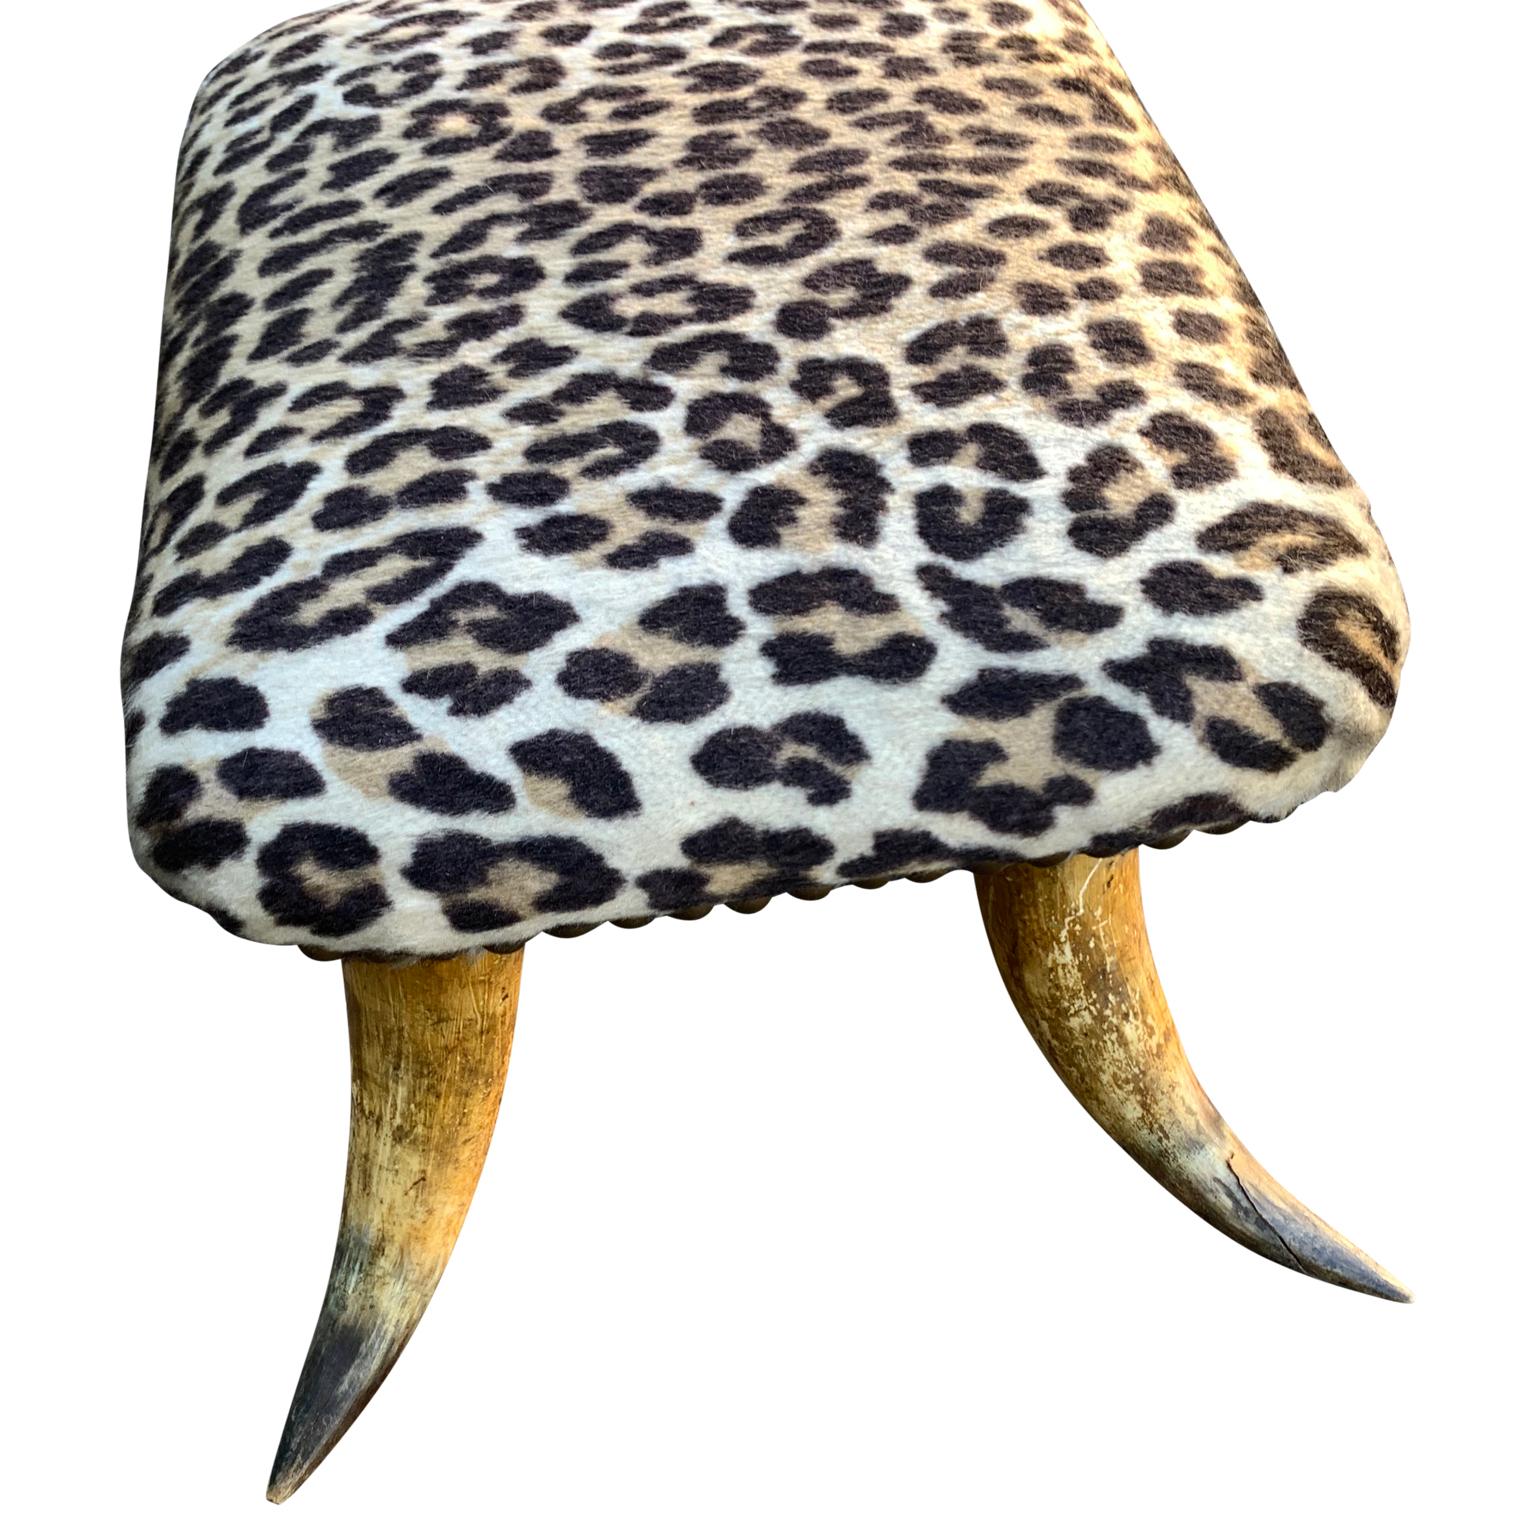 Hand-Crafted Small Antique Faux Cheetah Hide Upholstered Horn Footstool